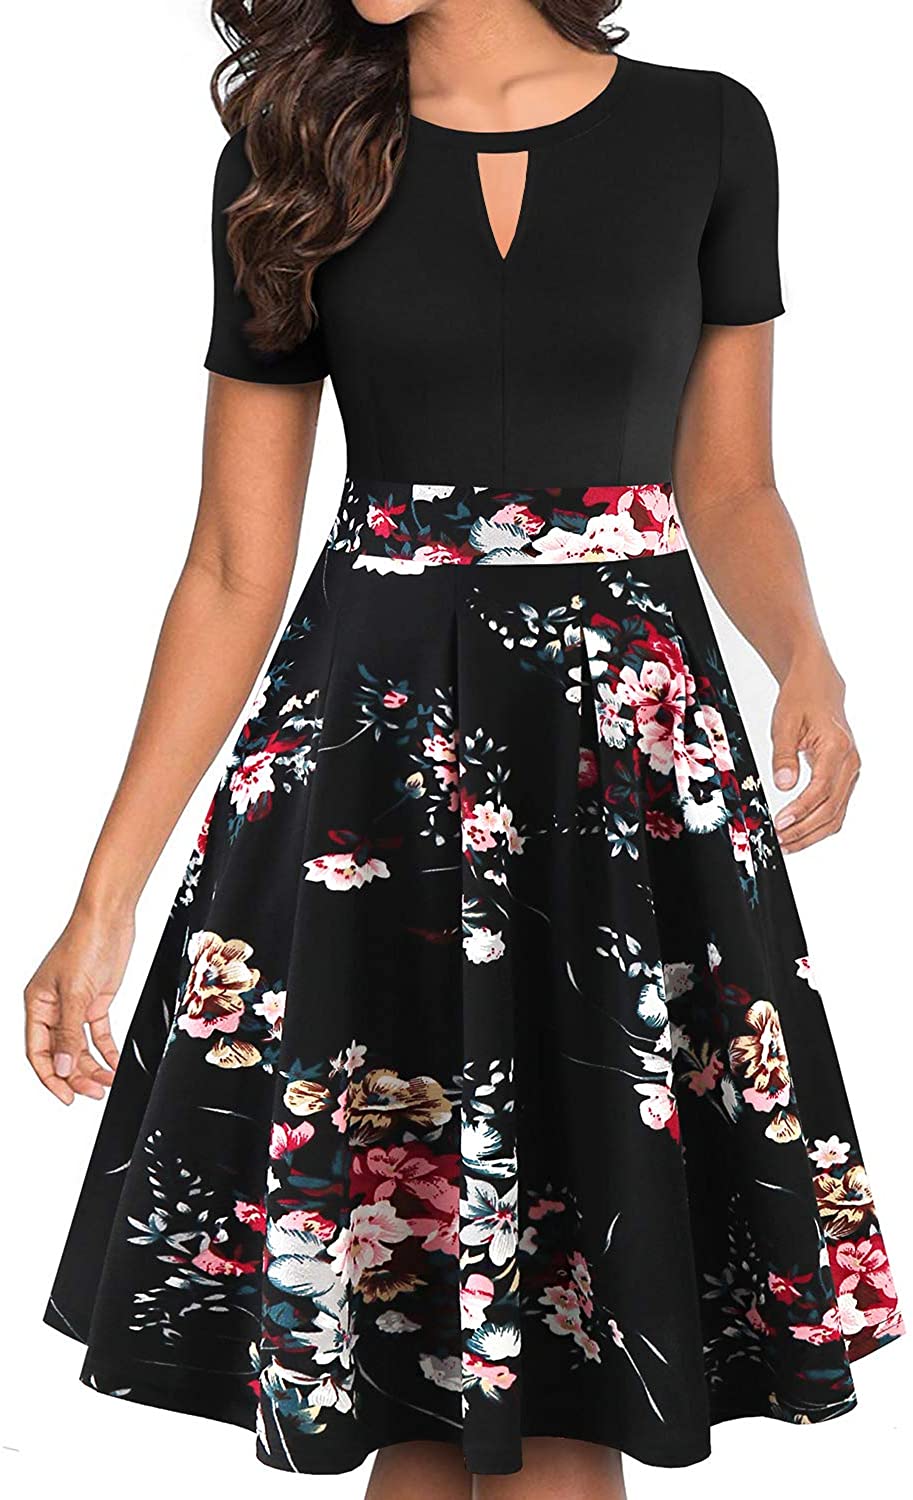 YATHON Women's Vintage Floral Flared A-Line Swing Casual Party Dresses ...